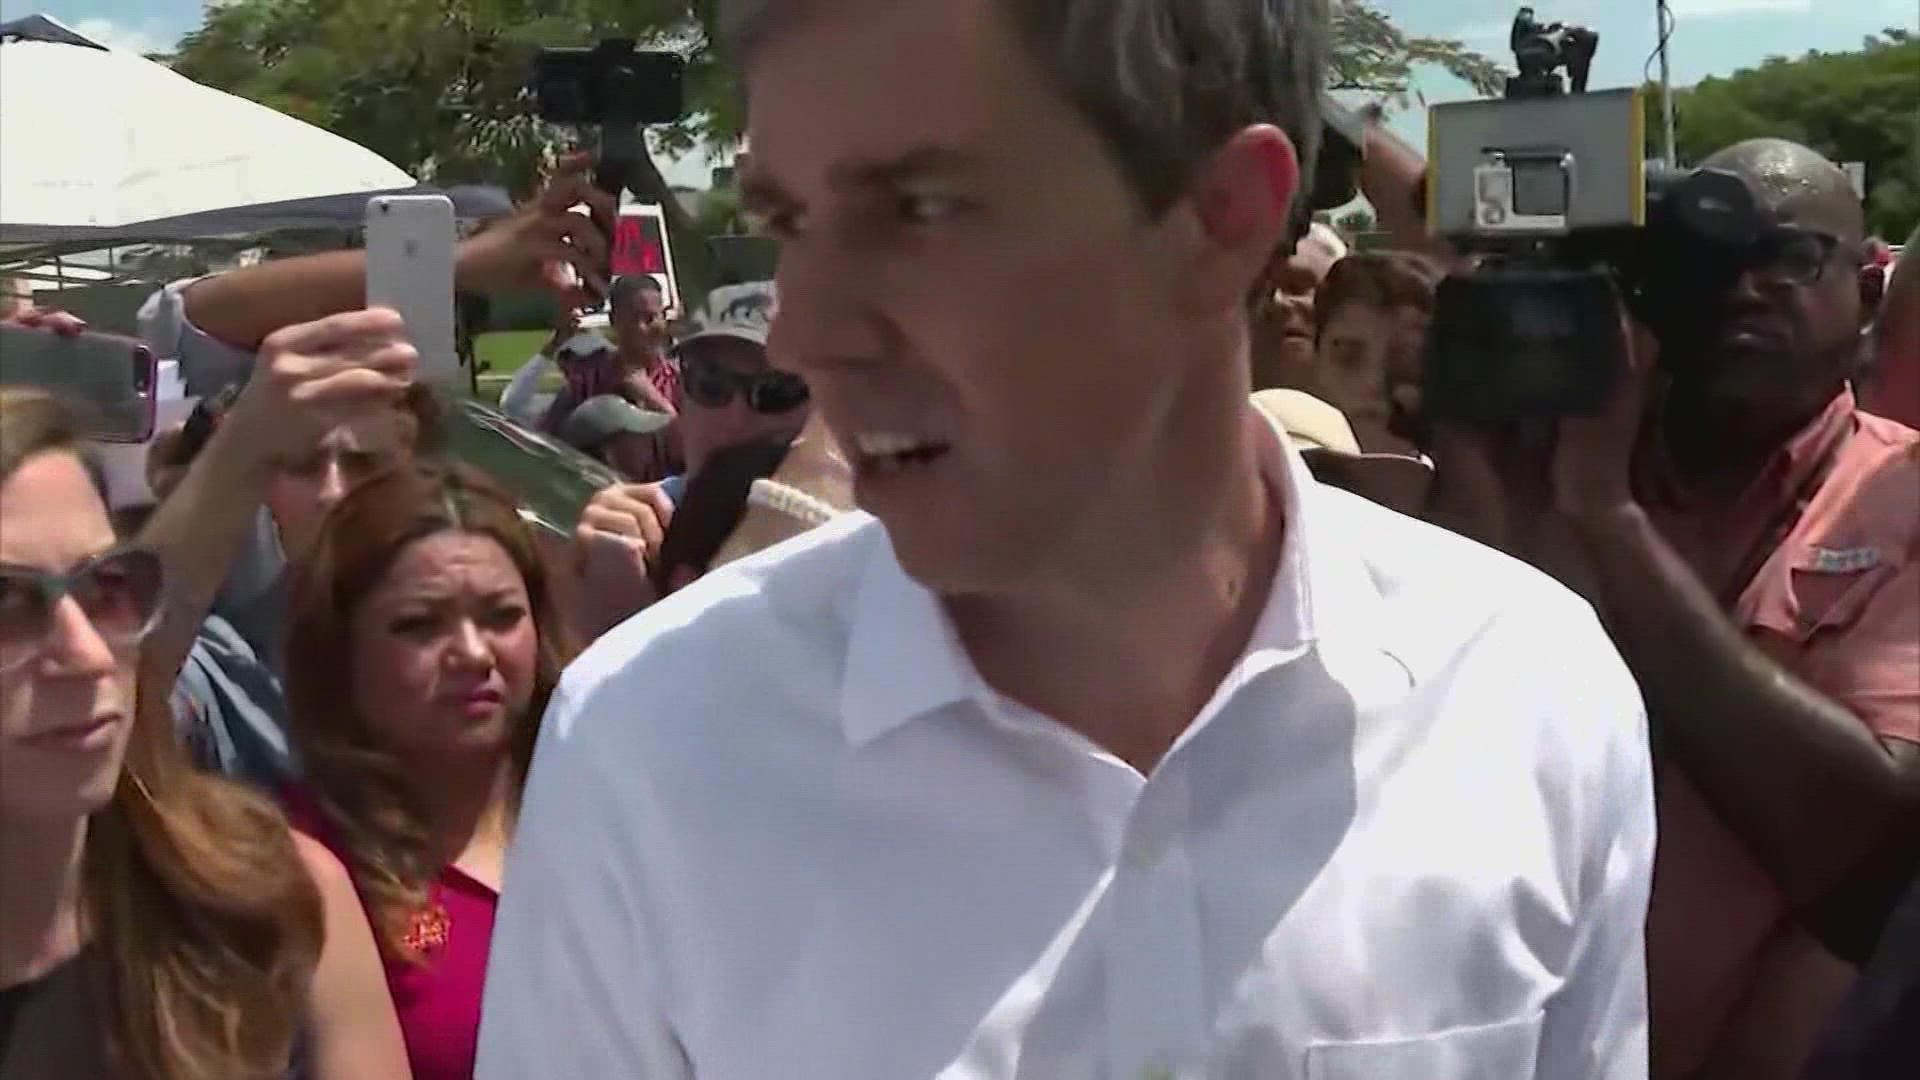 Beto O'Rourke made a stop on his campaign trail at Prairie View A&M University on Friday.